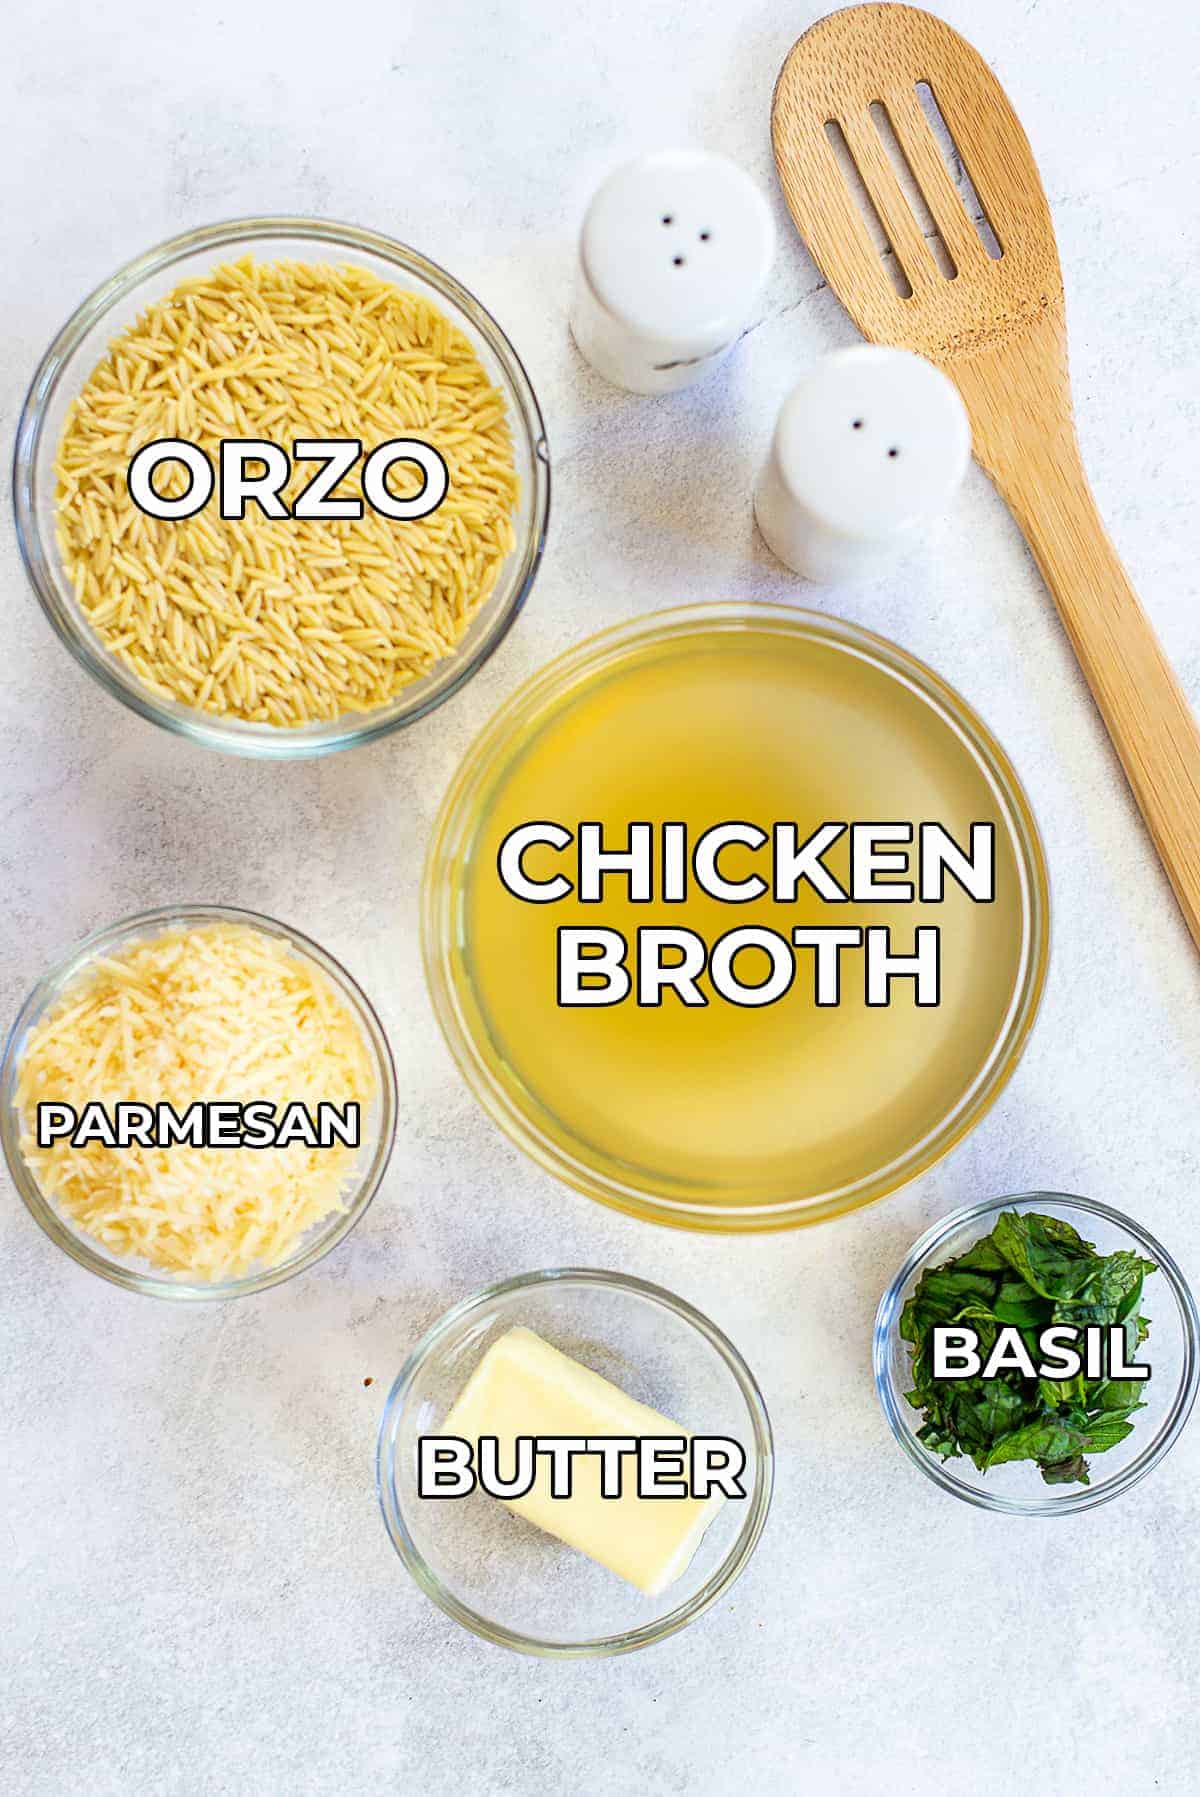 ingredients for Parmesan Orzo recipe.